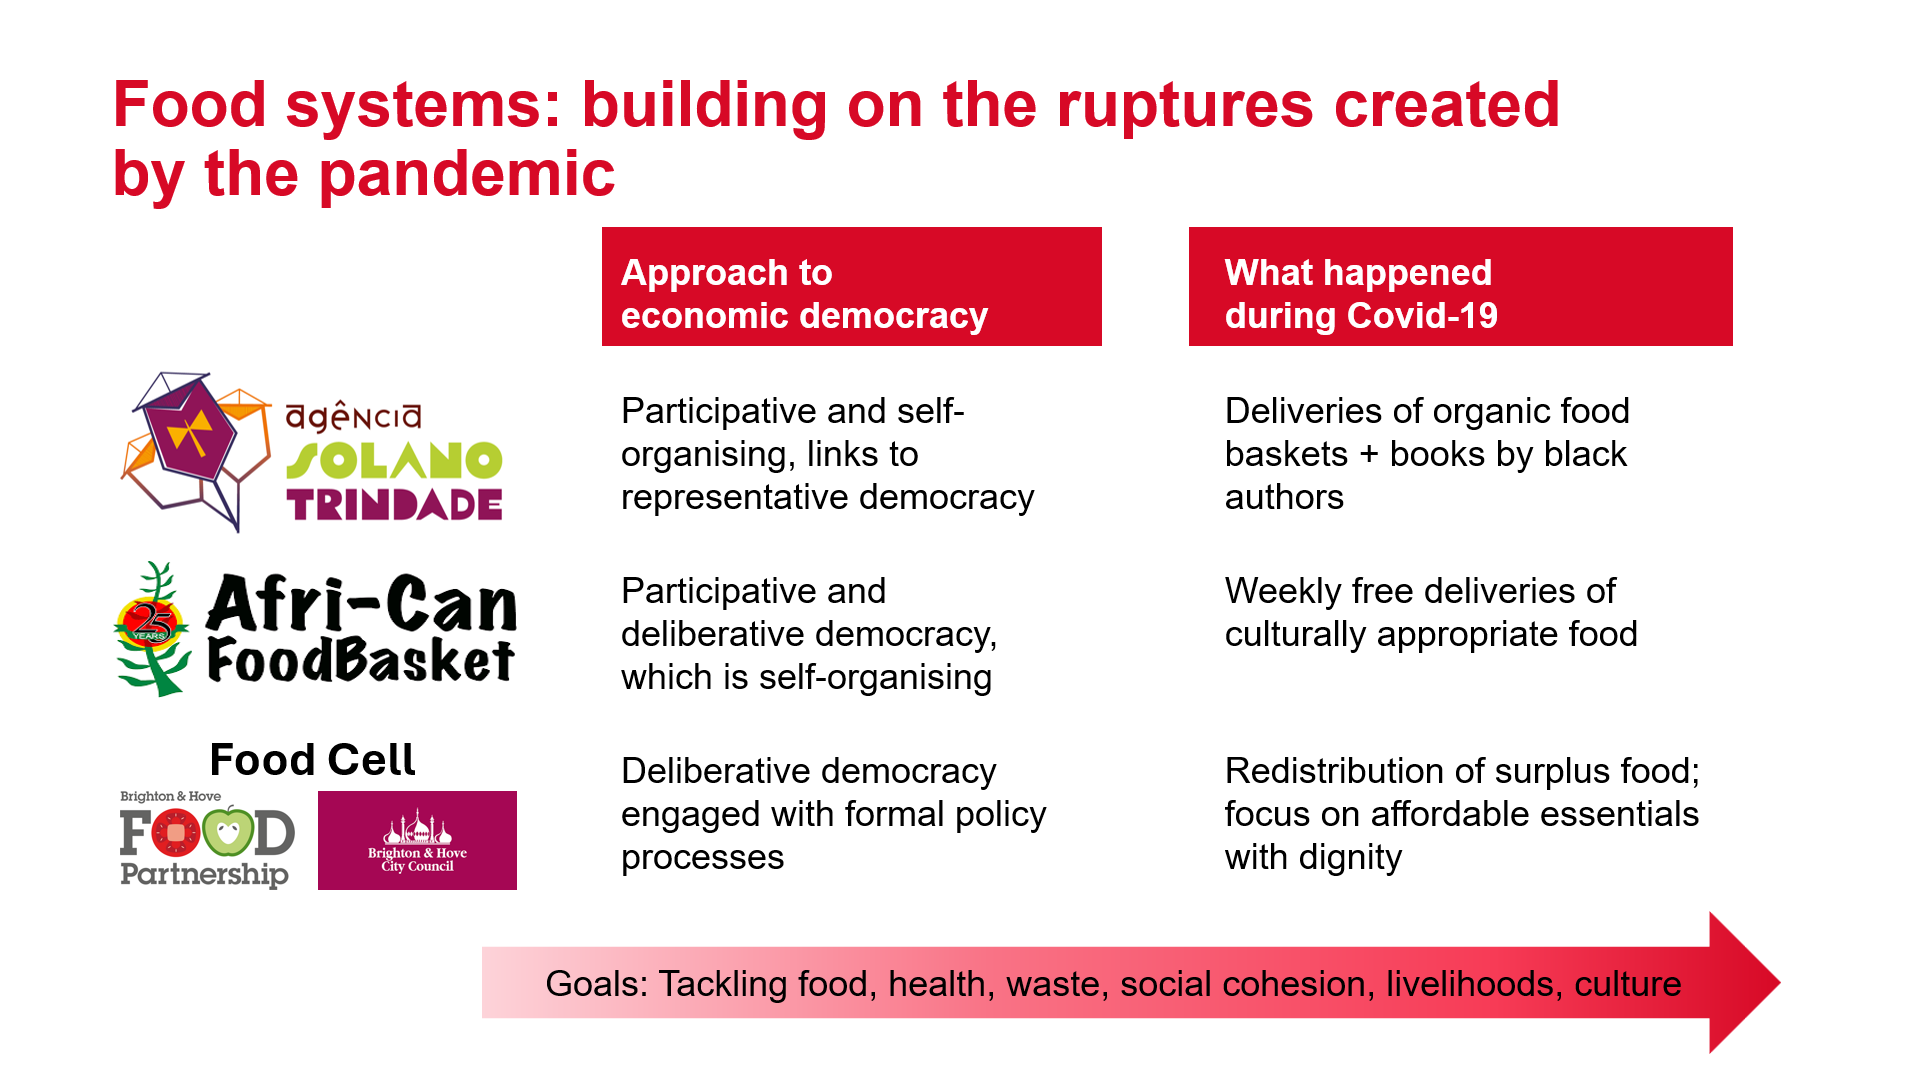 Image showing how three food initiatives developed economic democracy initiatives during Covid-19